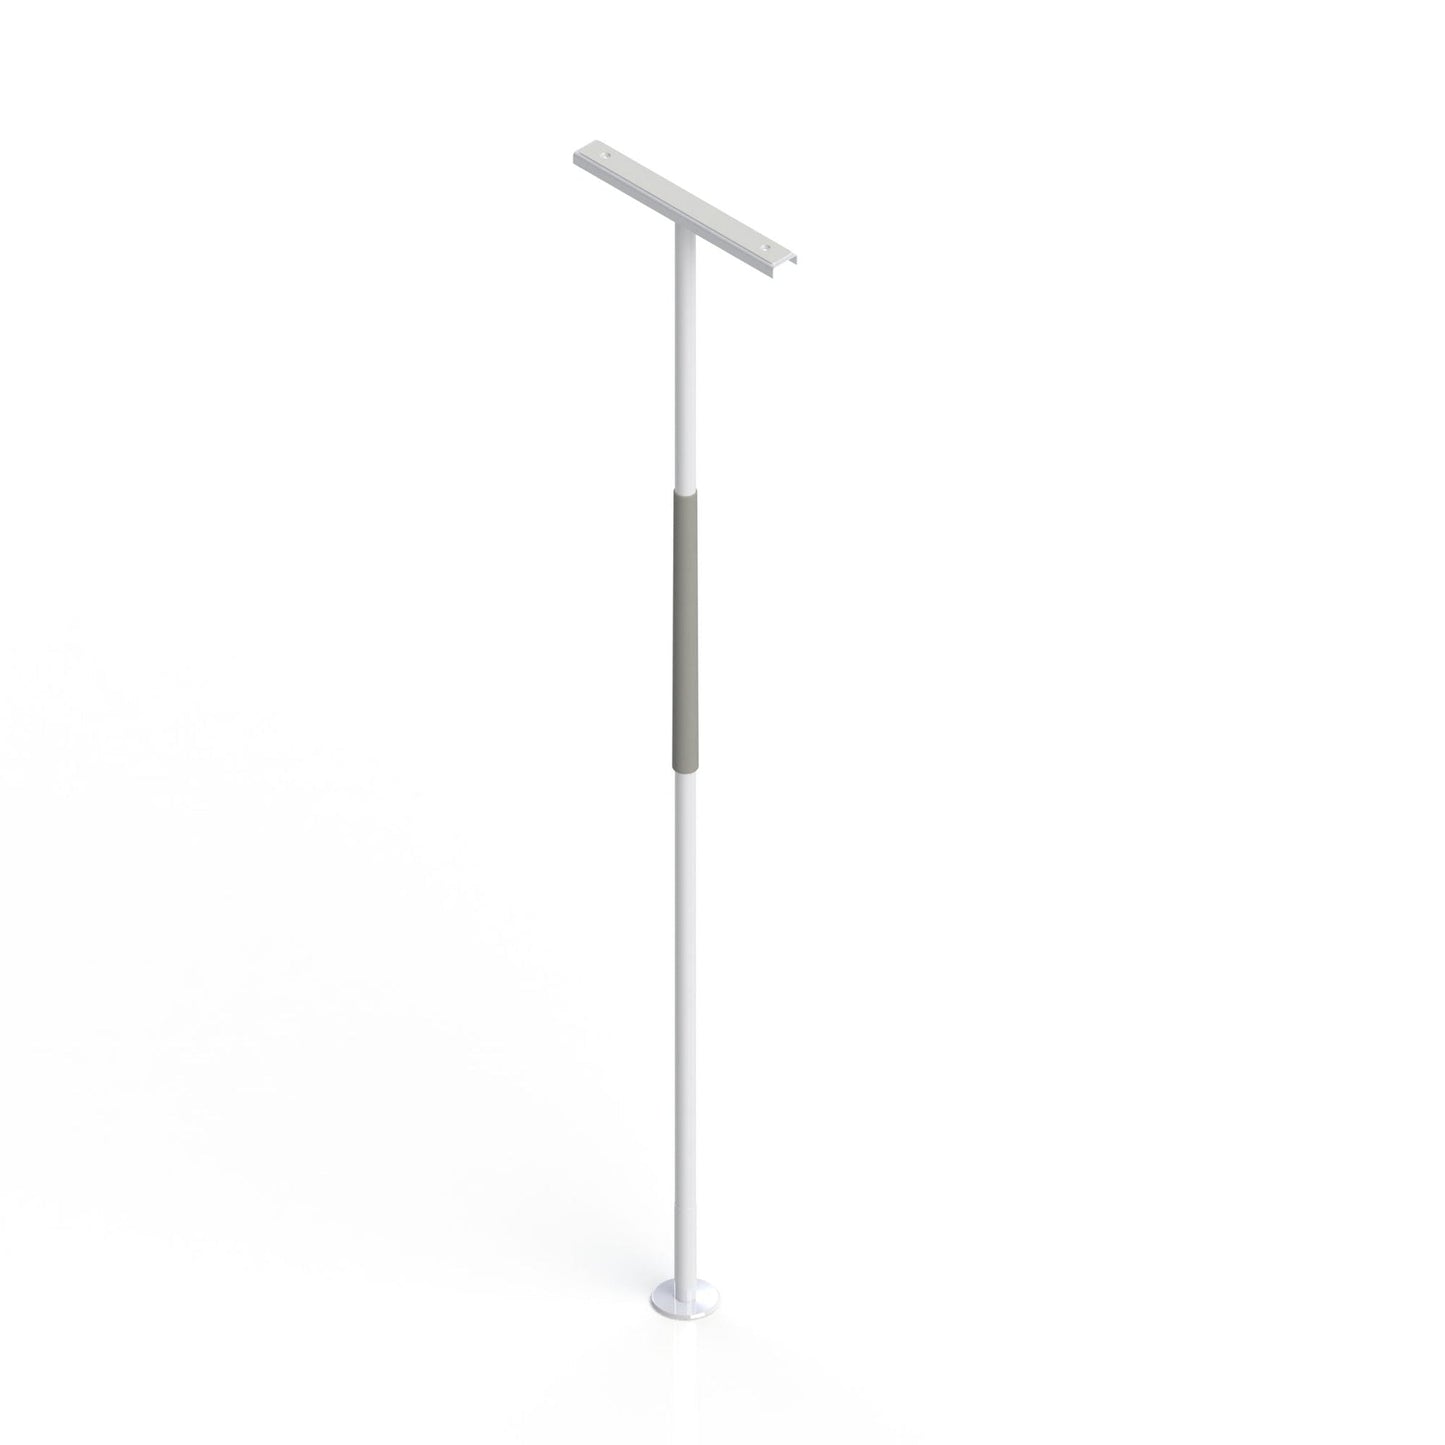 HealthCraft SuperPole White Bariatric Floor to Ceiling Safety Pole